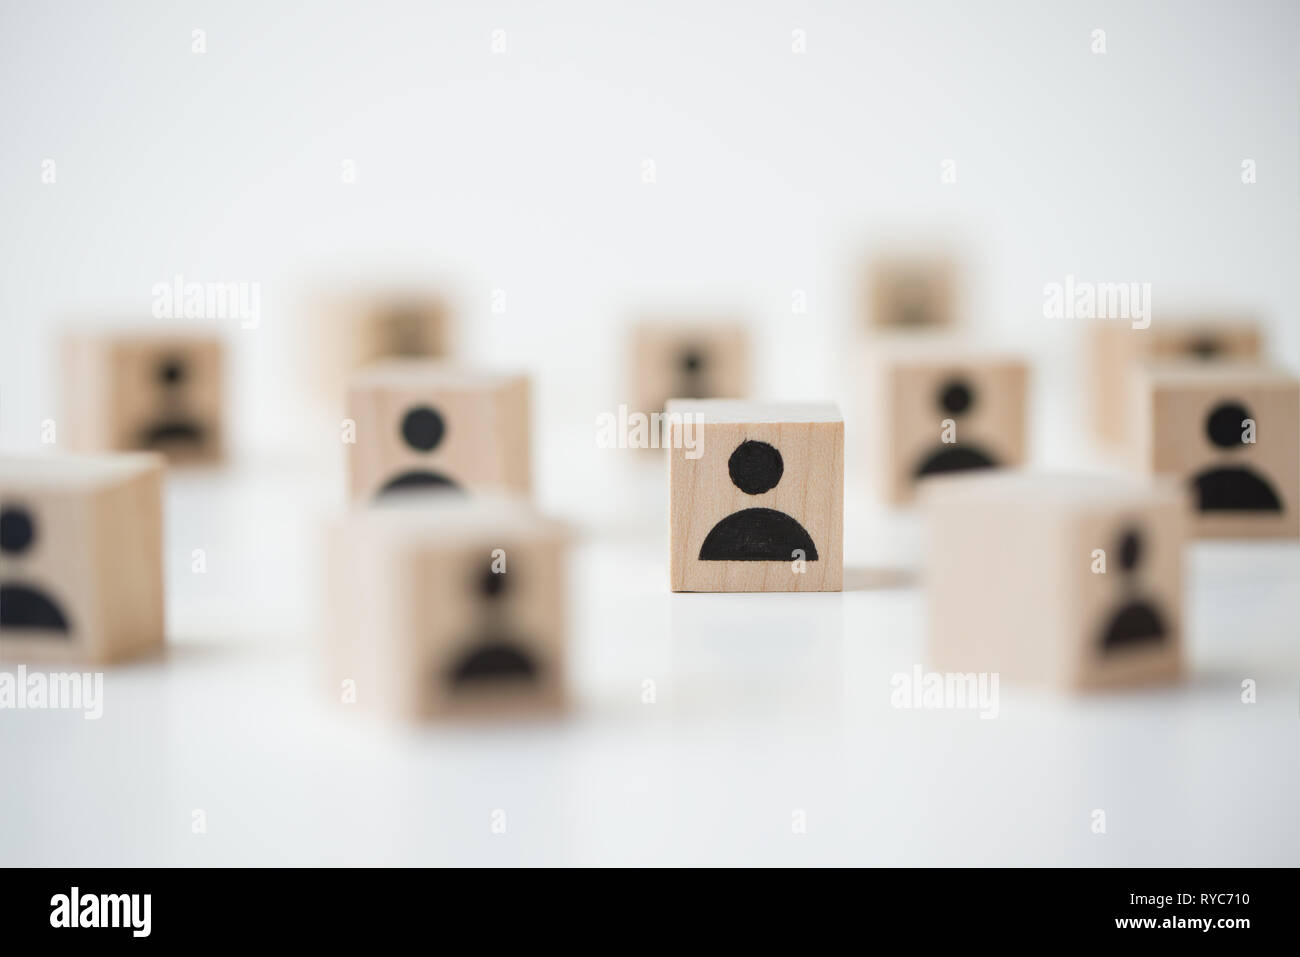 Group of wooden cube block with icon people Stock Photo